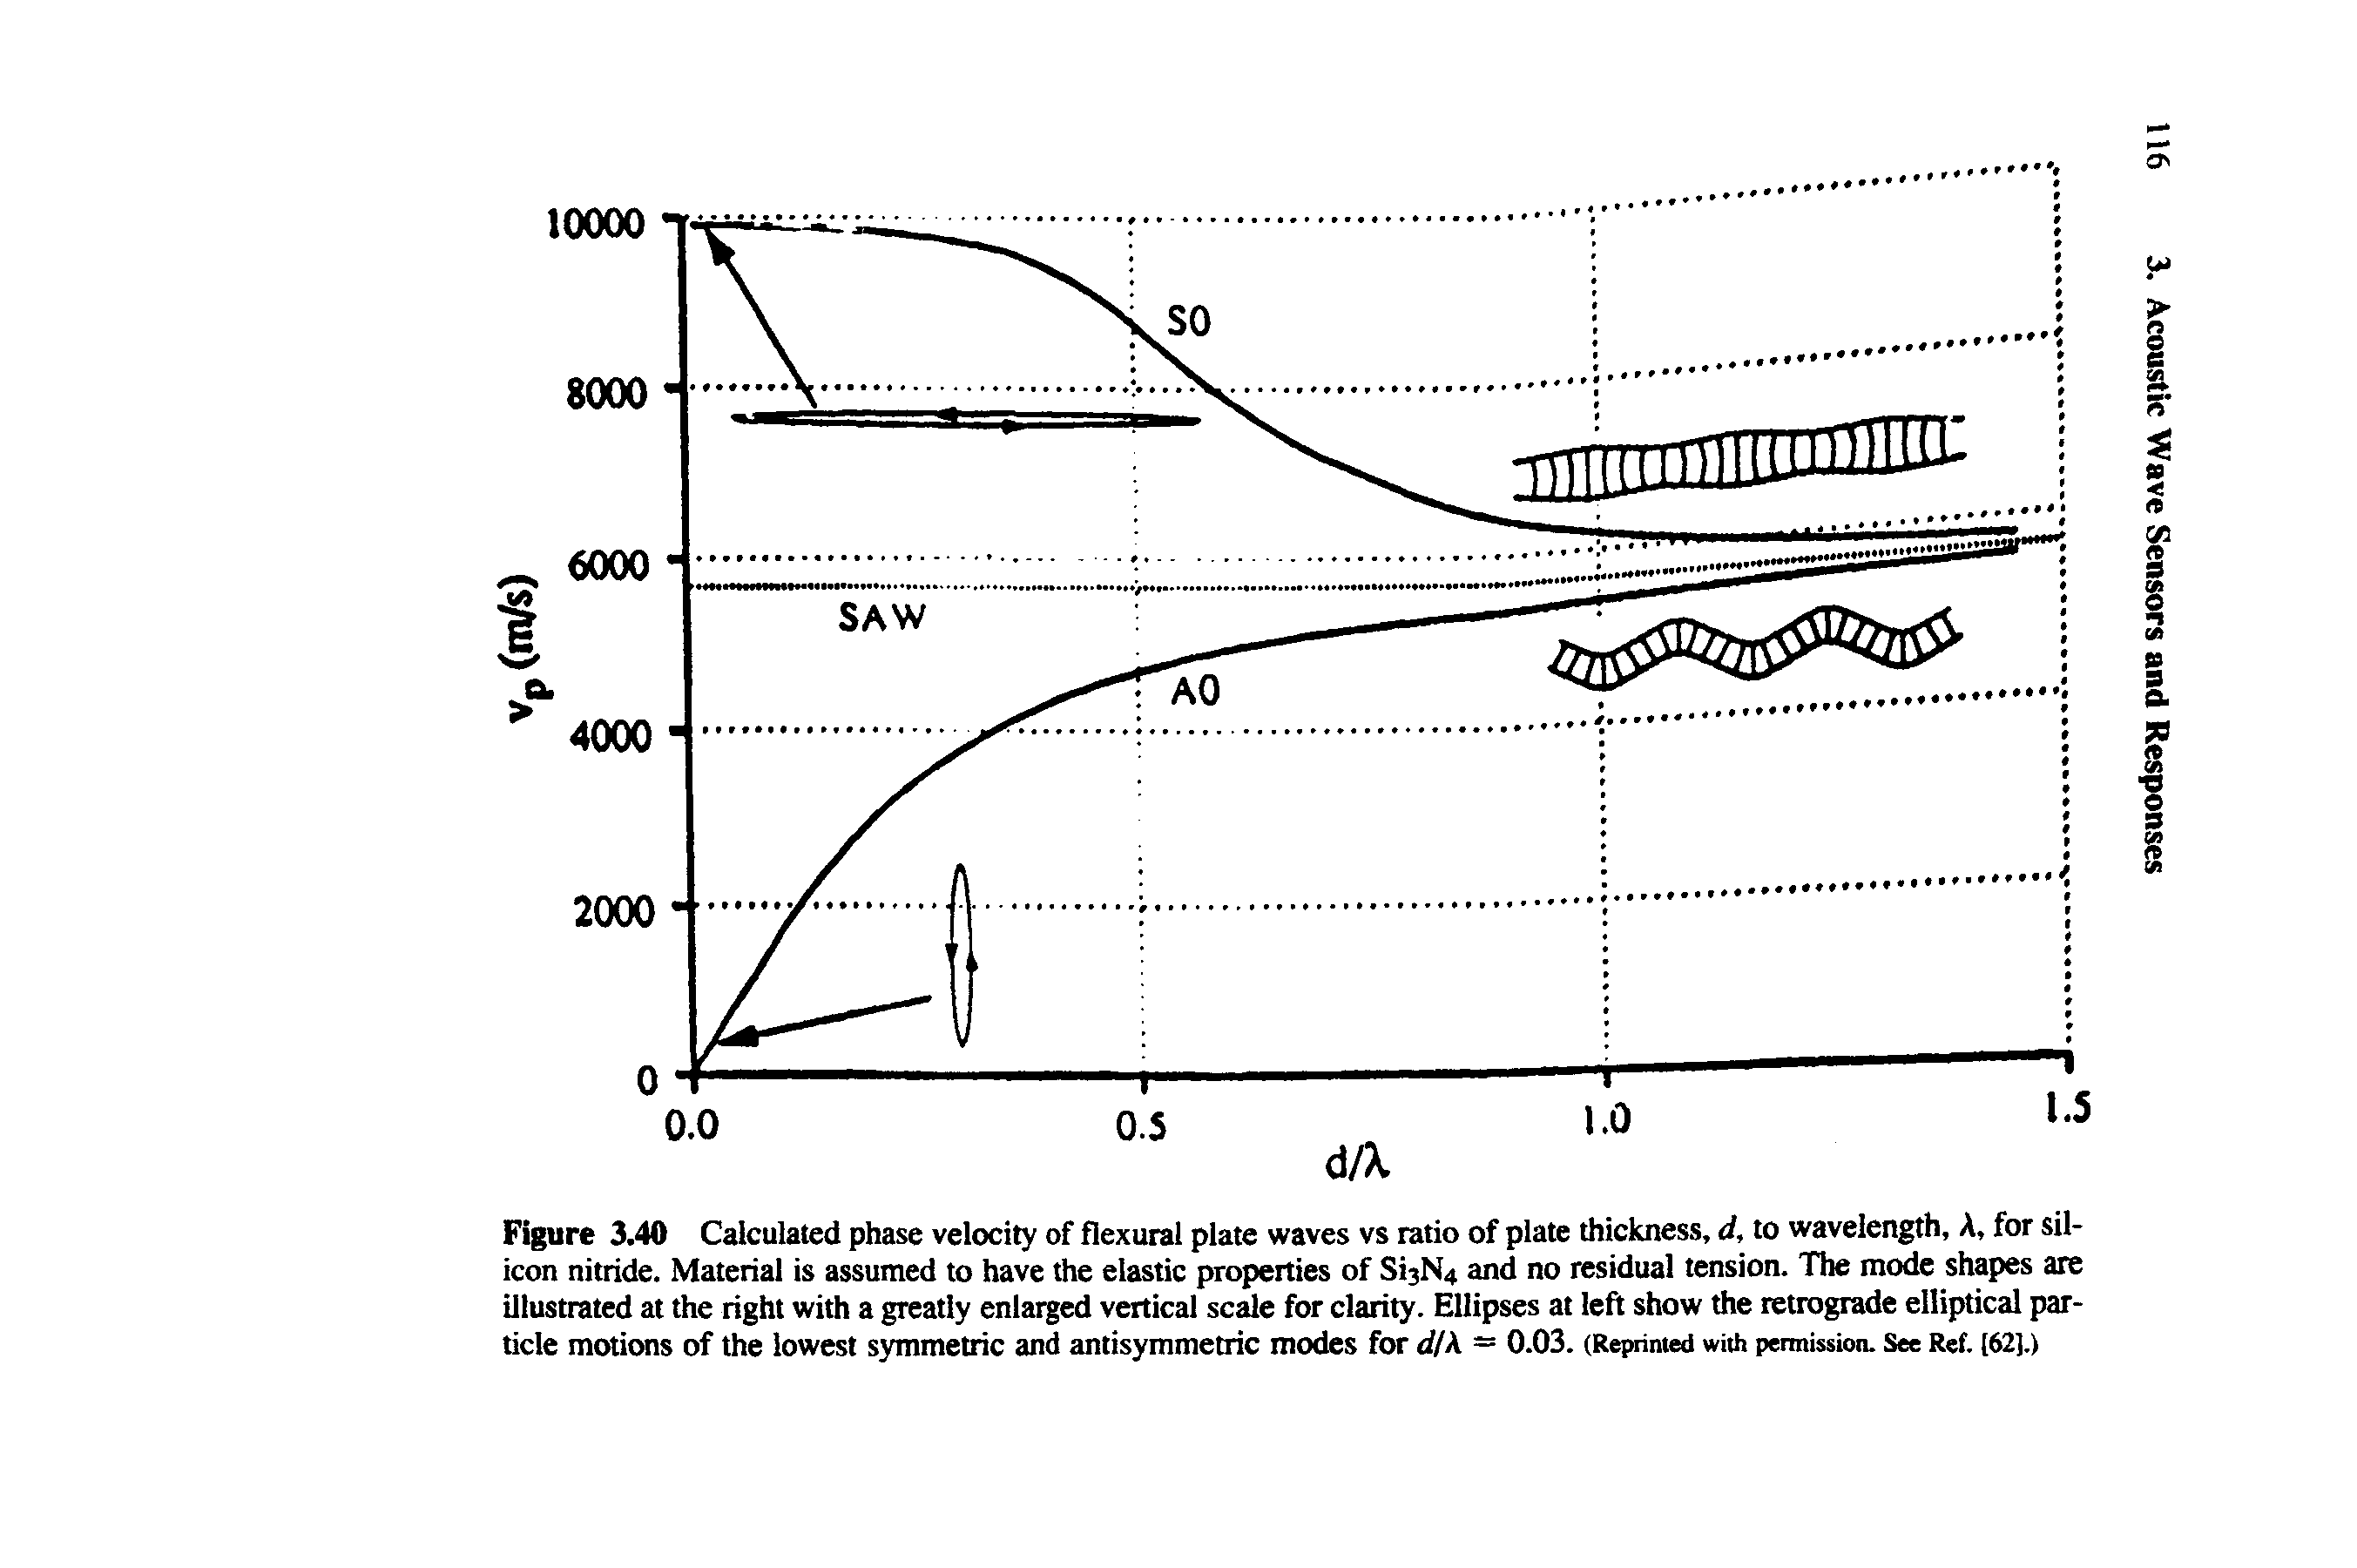 Figure 3.40 Calculated phase velocity of flexural plate waves vs ratio of plate thickness, d, to wavelength. A, for silicon nitride. Material is assumed to have the elastic properties of Si3N4 and no residual tension. The mode shapes ate illustrated at the right with a greatly enlarged vertical scale for clarity. Ellipses at left show the retrograde elliptical particle motions of the lowest S3rmmetric and antisymmetric modes for d/A = 0.03. (Reprinted with pemtission. See Ref. (621.)...